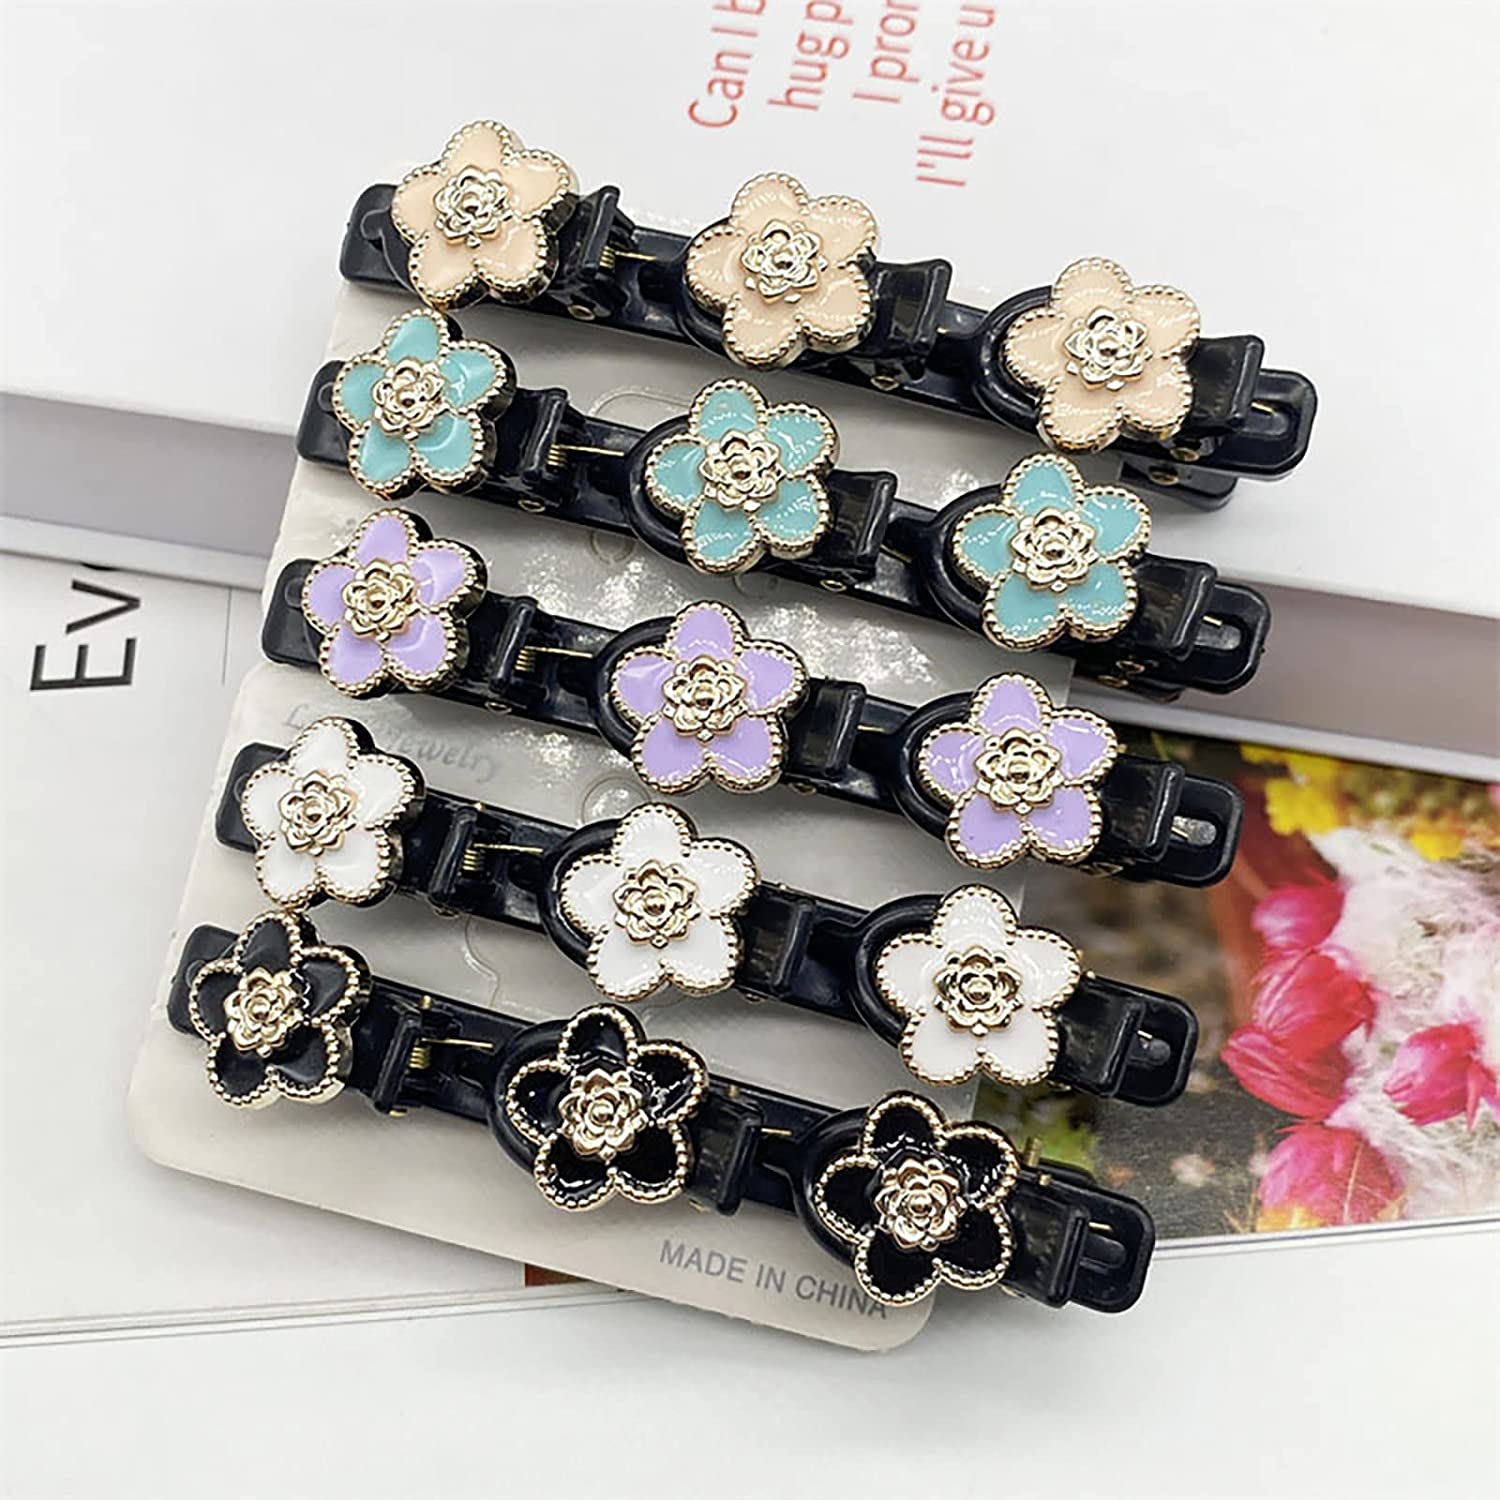 Sparkling Crystal Stone Braided Hair Clips for Women,Rsvelte